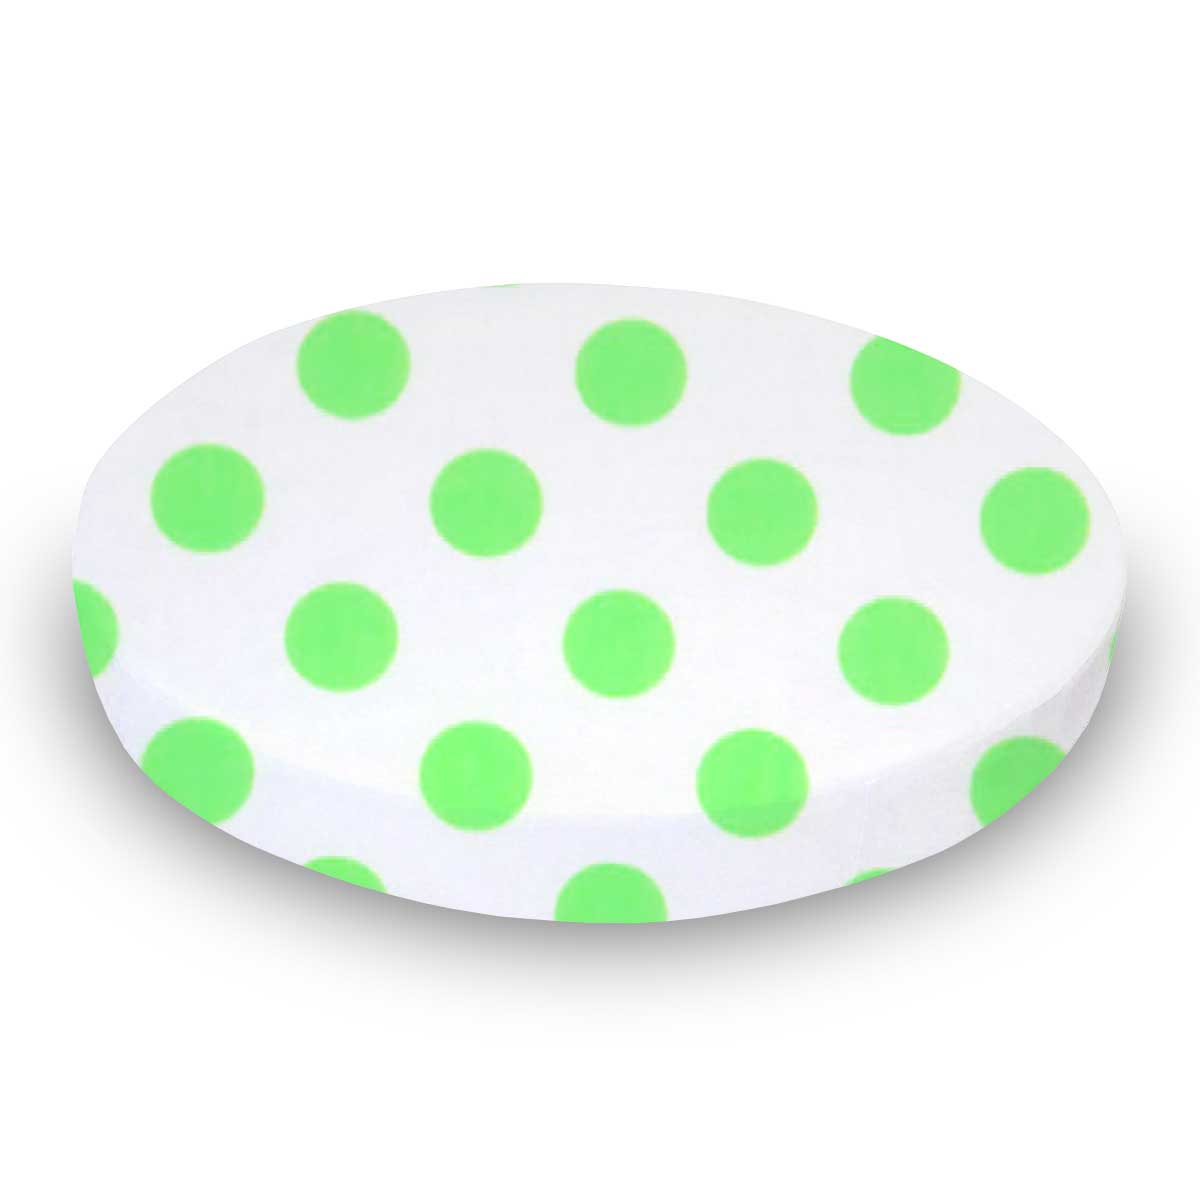 SheetWorld Fitted Round Crib Sheet - 100% Cotton Woven - Neon Green